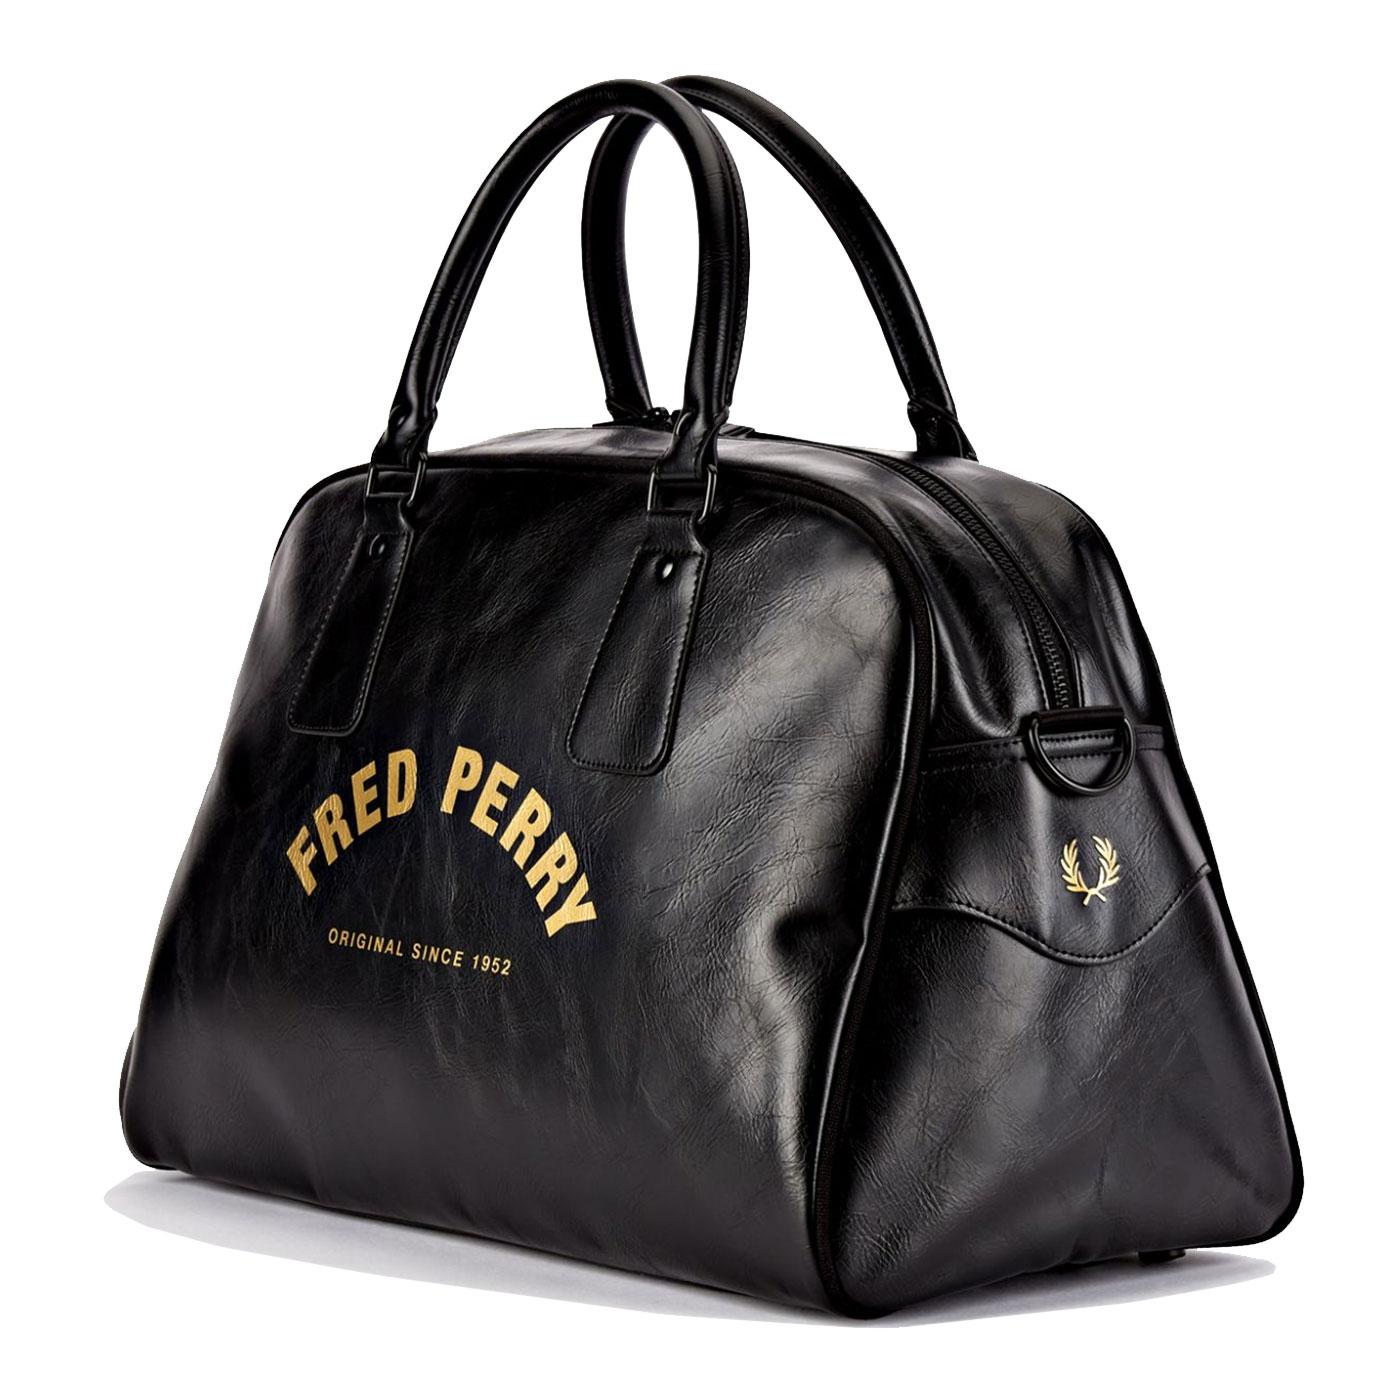 FRED PERRY Retro Arch Branded Bowling Bag in Black